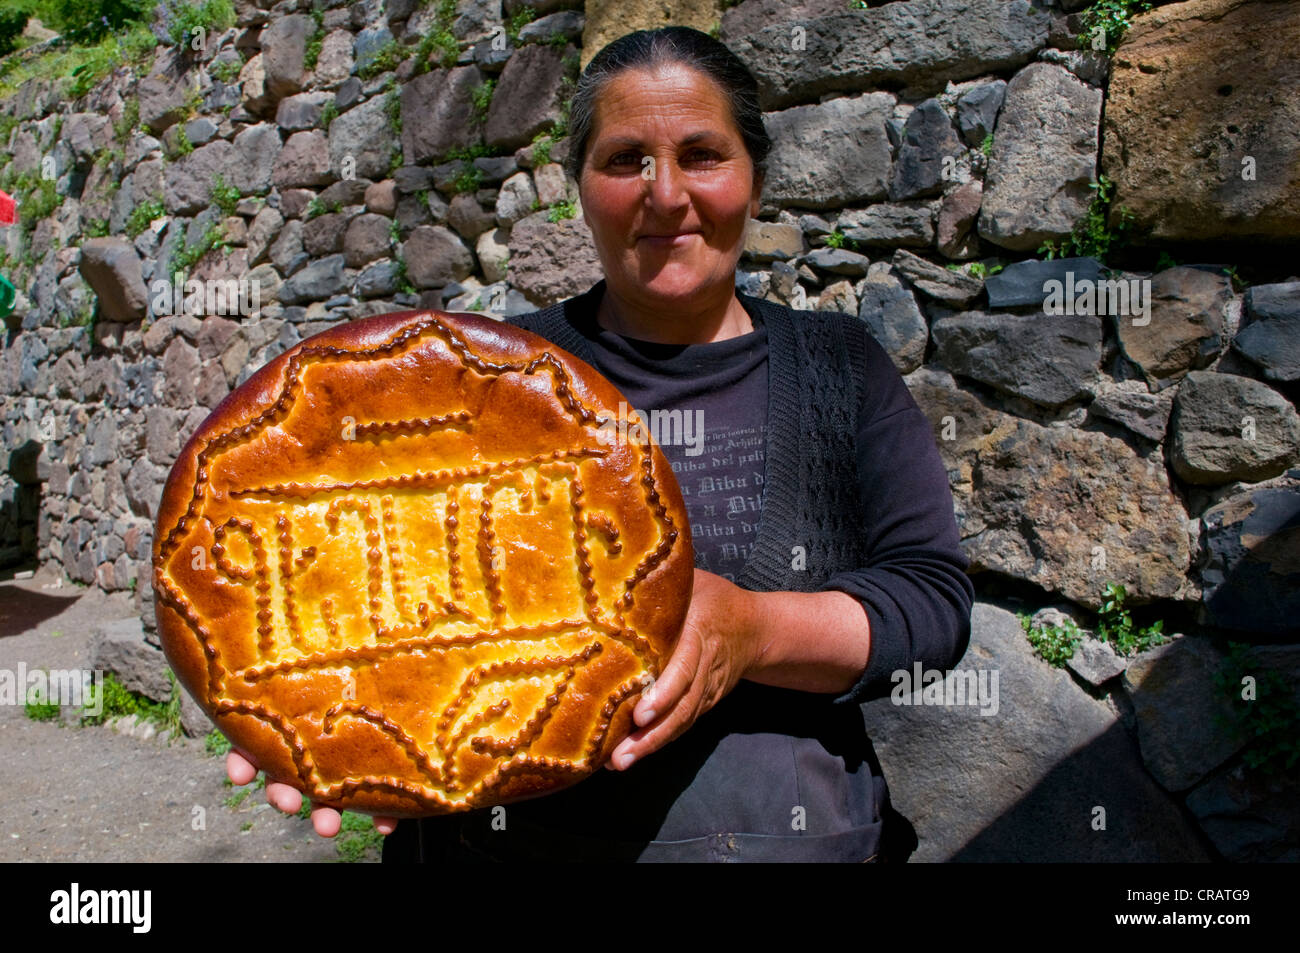 Smiling woman holding traditional bread, Geghard Monastery, Armenia, Middle East Stock Photo